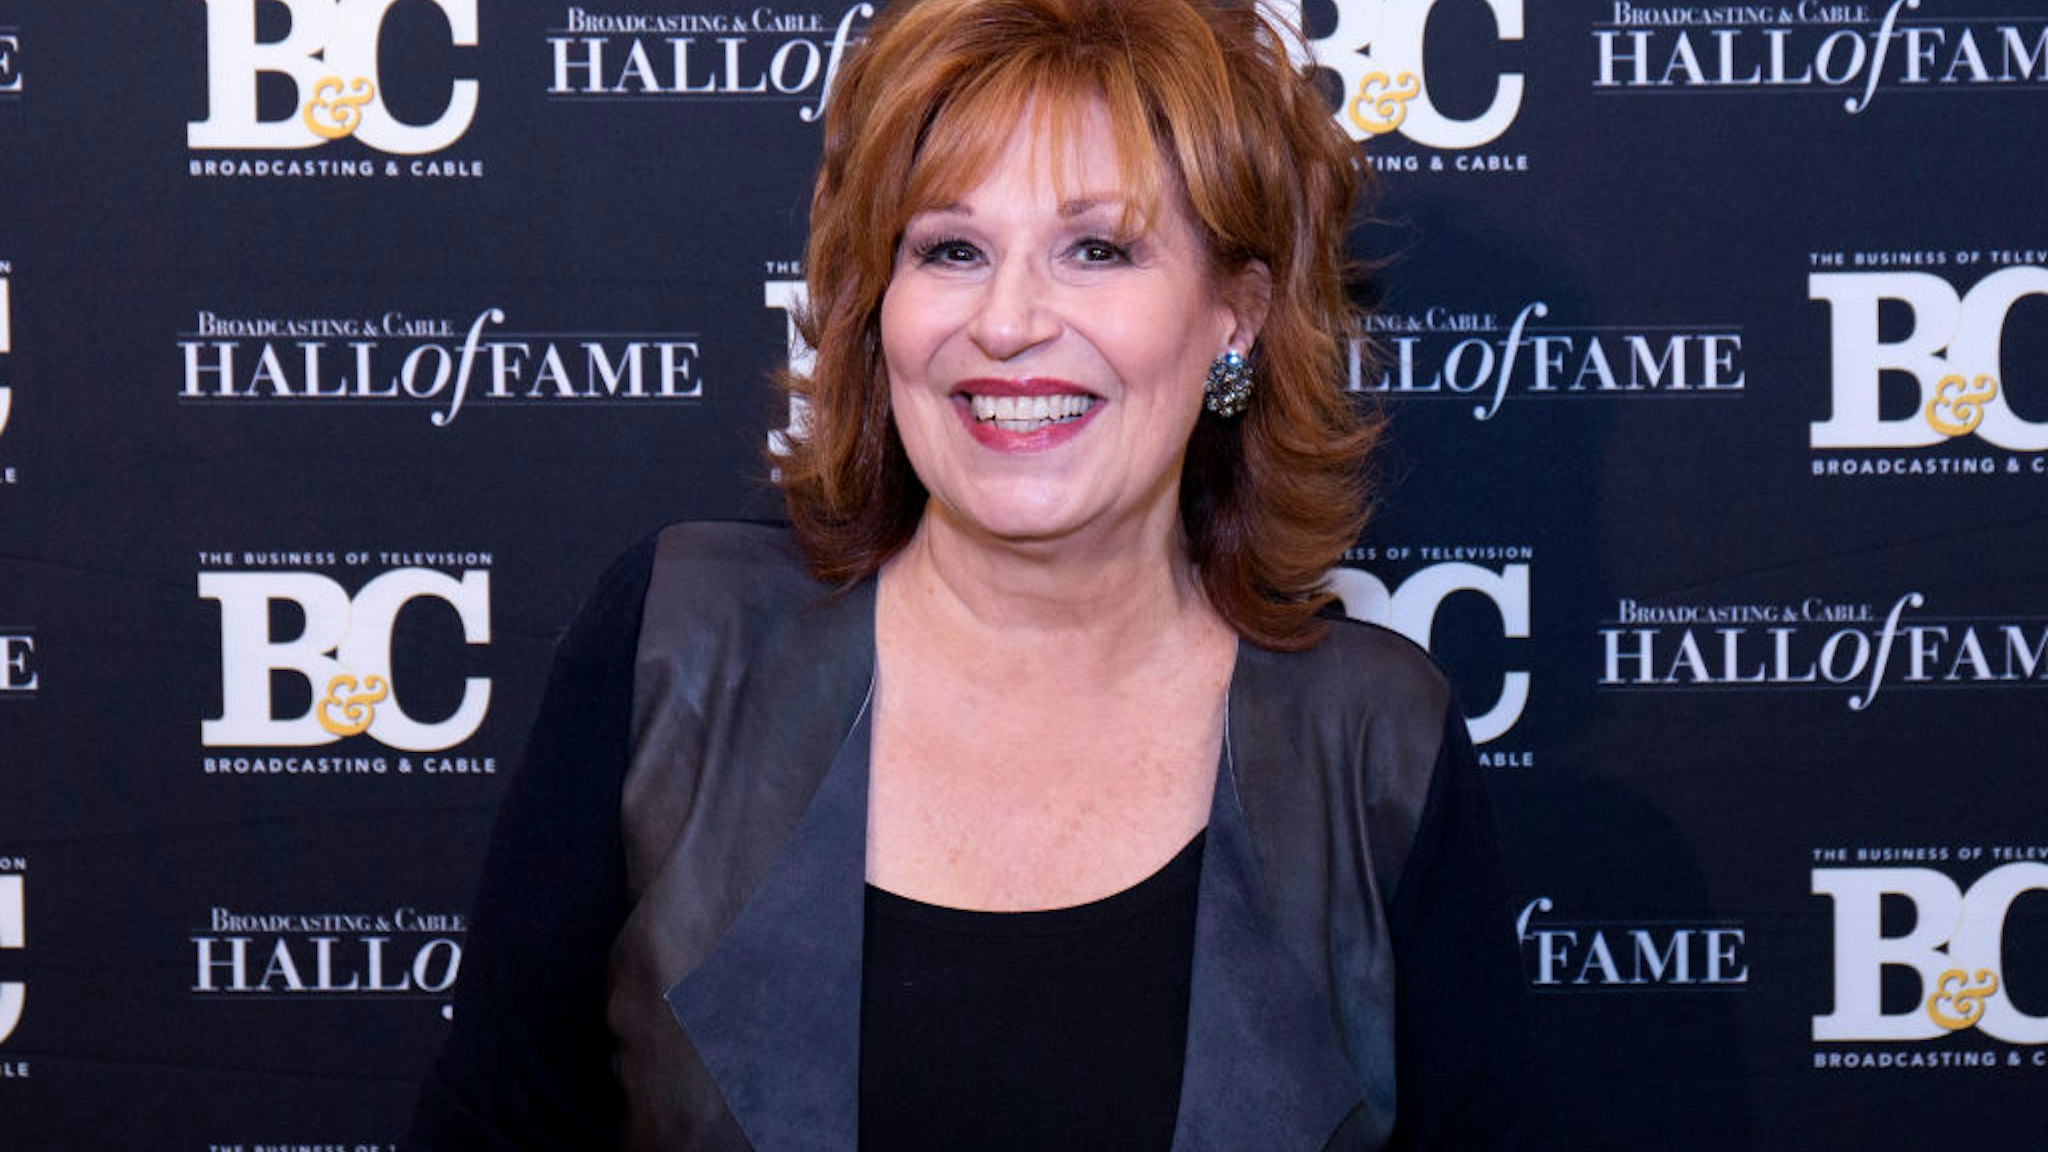 NEW YORK, NY - OCTOBER 16: Joy Behar attends the 2017 Broadcasting &amp; Cable Hall Of Fame 27th Anniversary Gala at Grand Hyatt New York on October 16, 2017 in New York City. (Photo by Santiago Felipe/Getty Images)